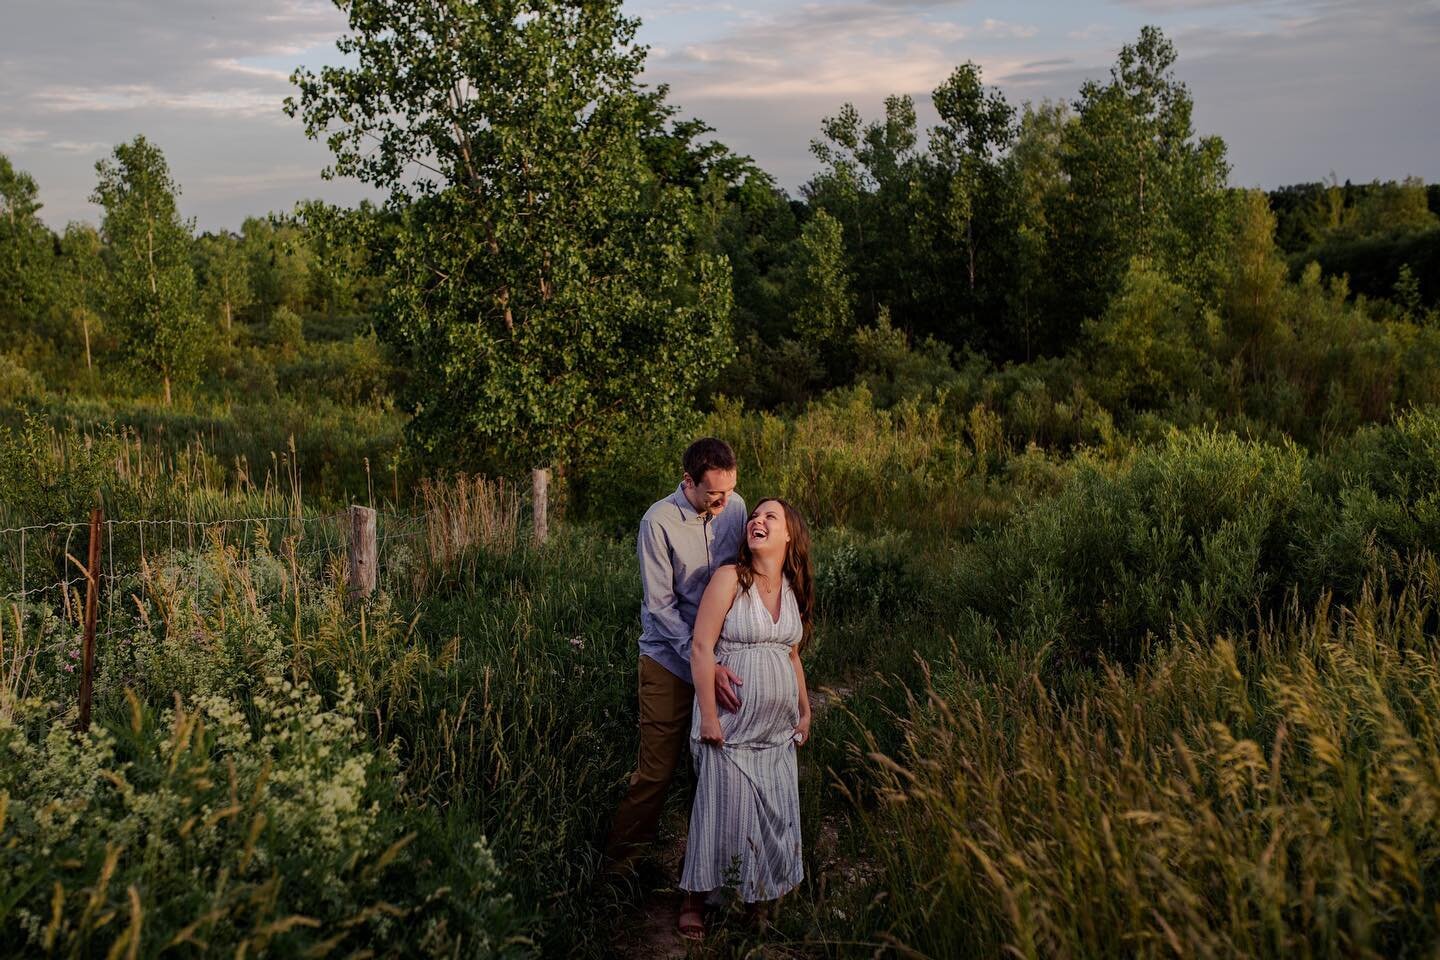 I can't believe it's almost been a year since this dreamy Spring maternity session! S+S posted a pic of their 9 month old baby the other day and I was like um excuse me WHAT! What a wild ride 2020/2021 has been... a year ago we never could have imagi